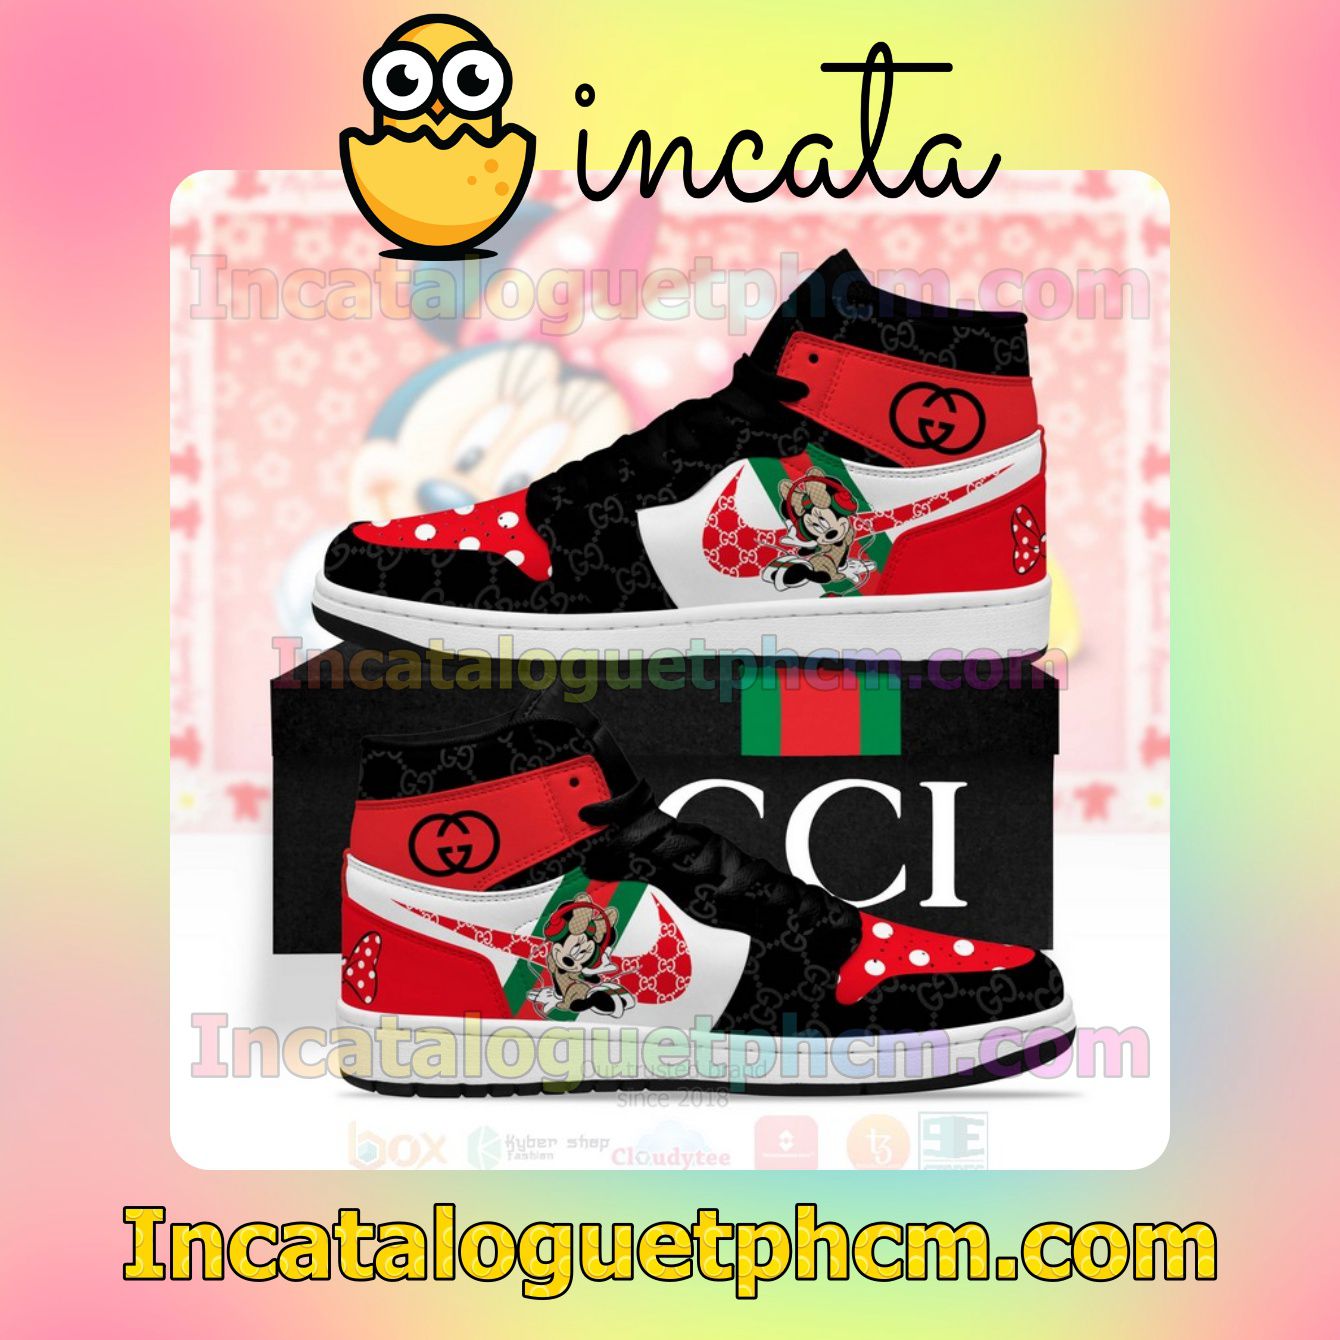 Nike Gucci Minnie Mouse High Top Air Jordan 1 Inspired Shoes